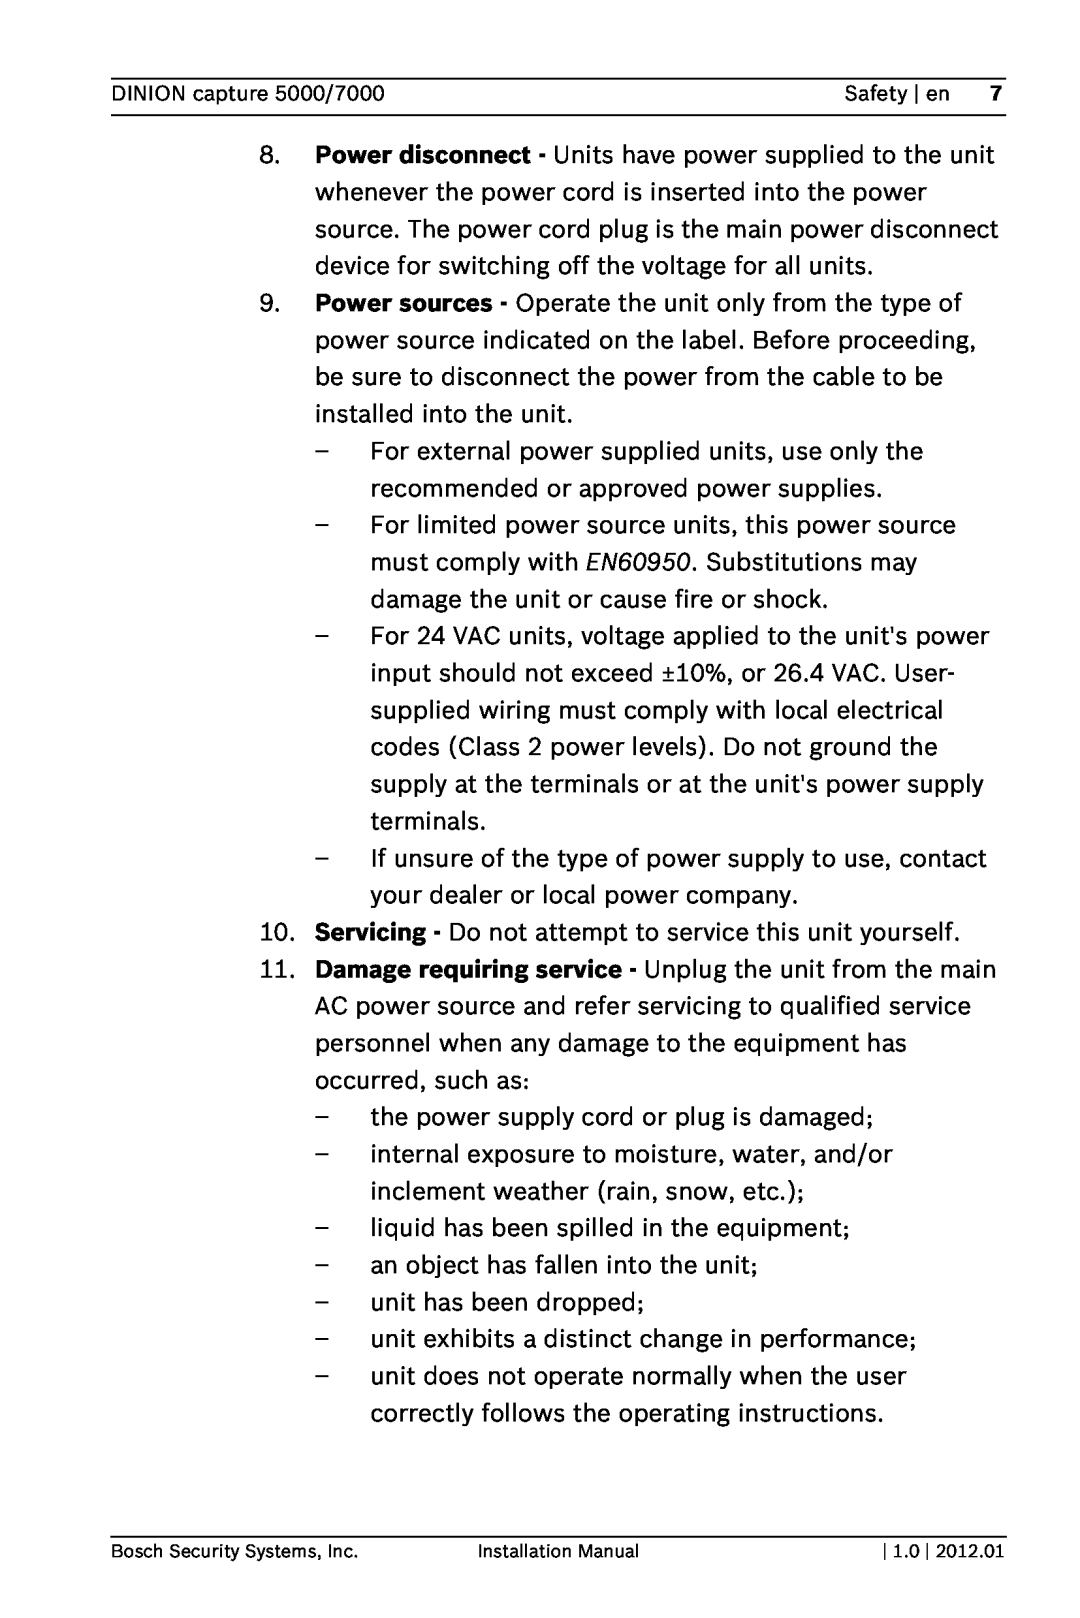 Bosch Appliances 7000, 5000 installation manual the power supply cord or plug is damaged 